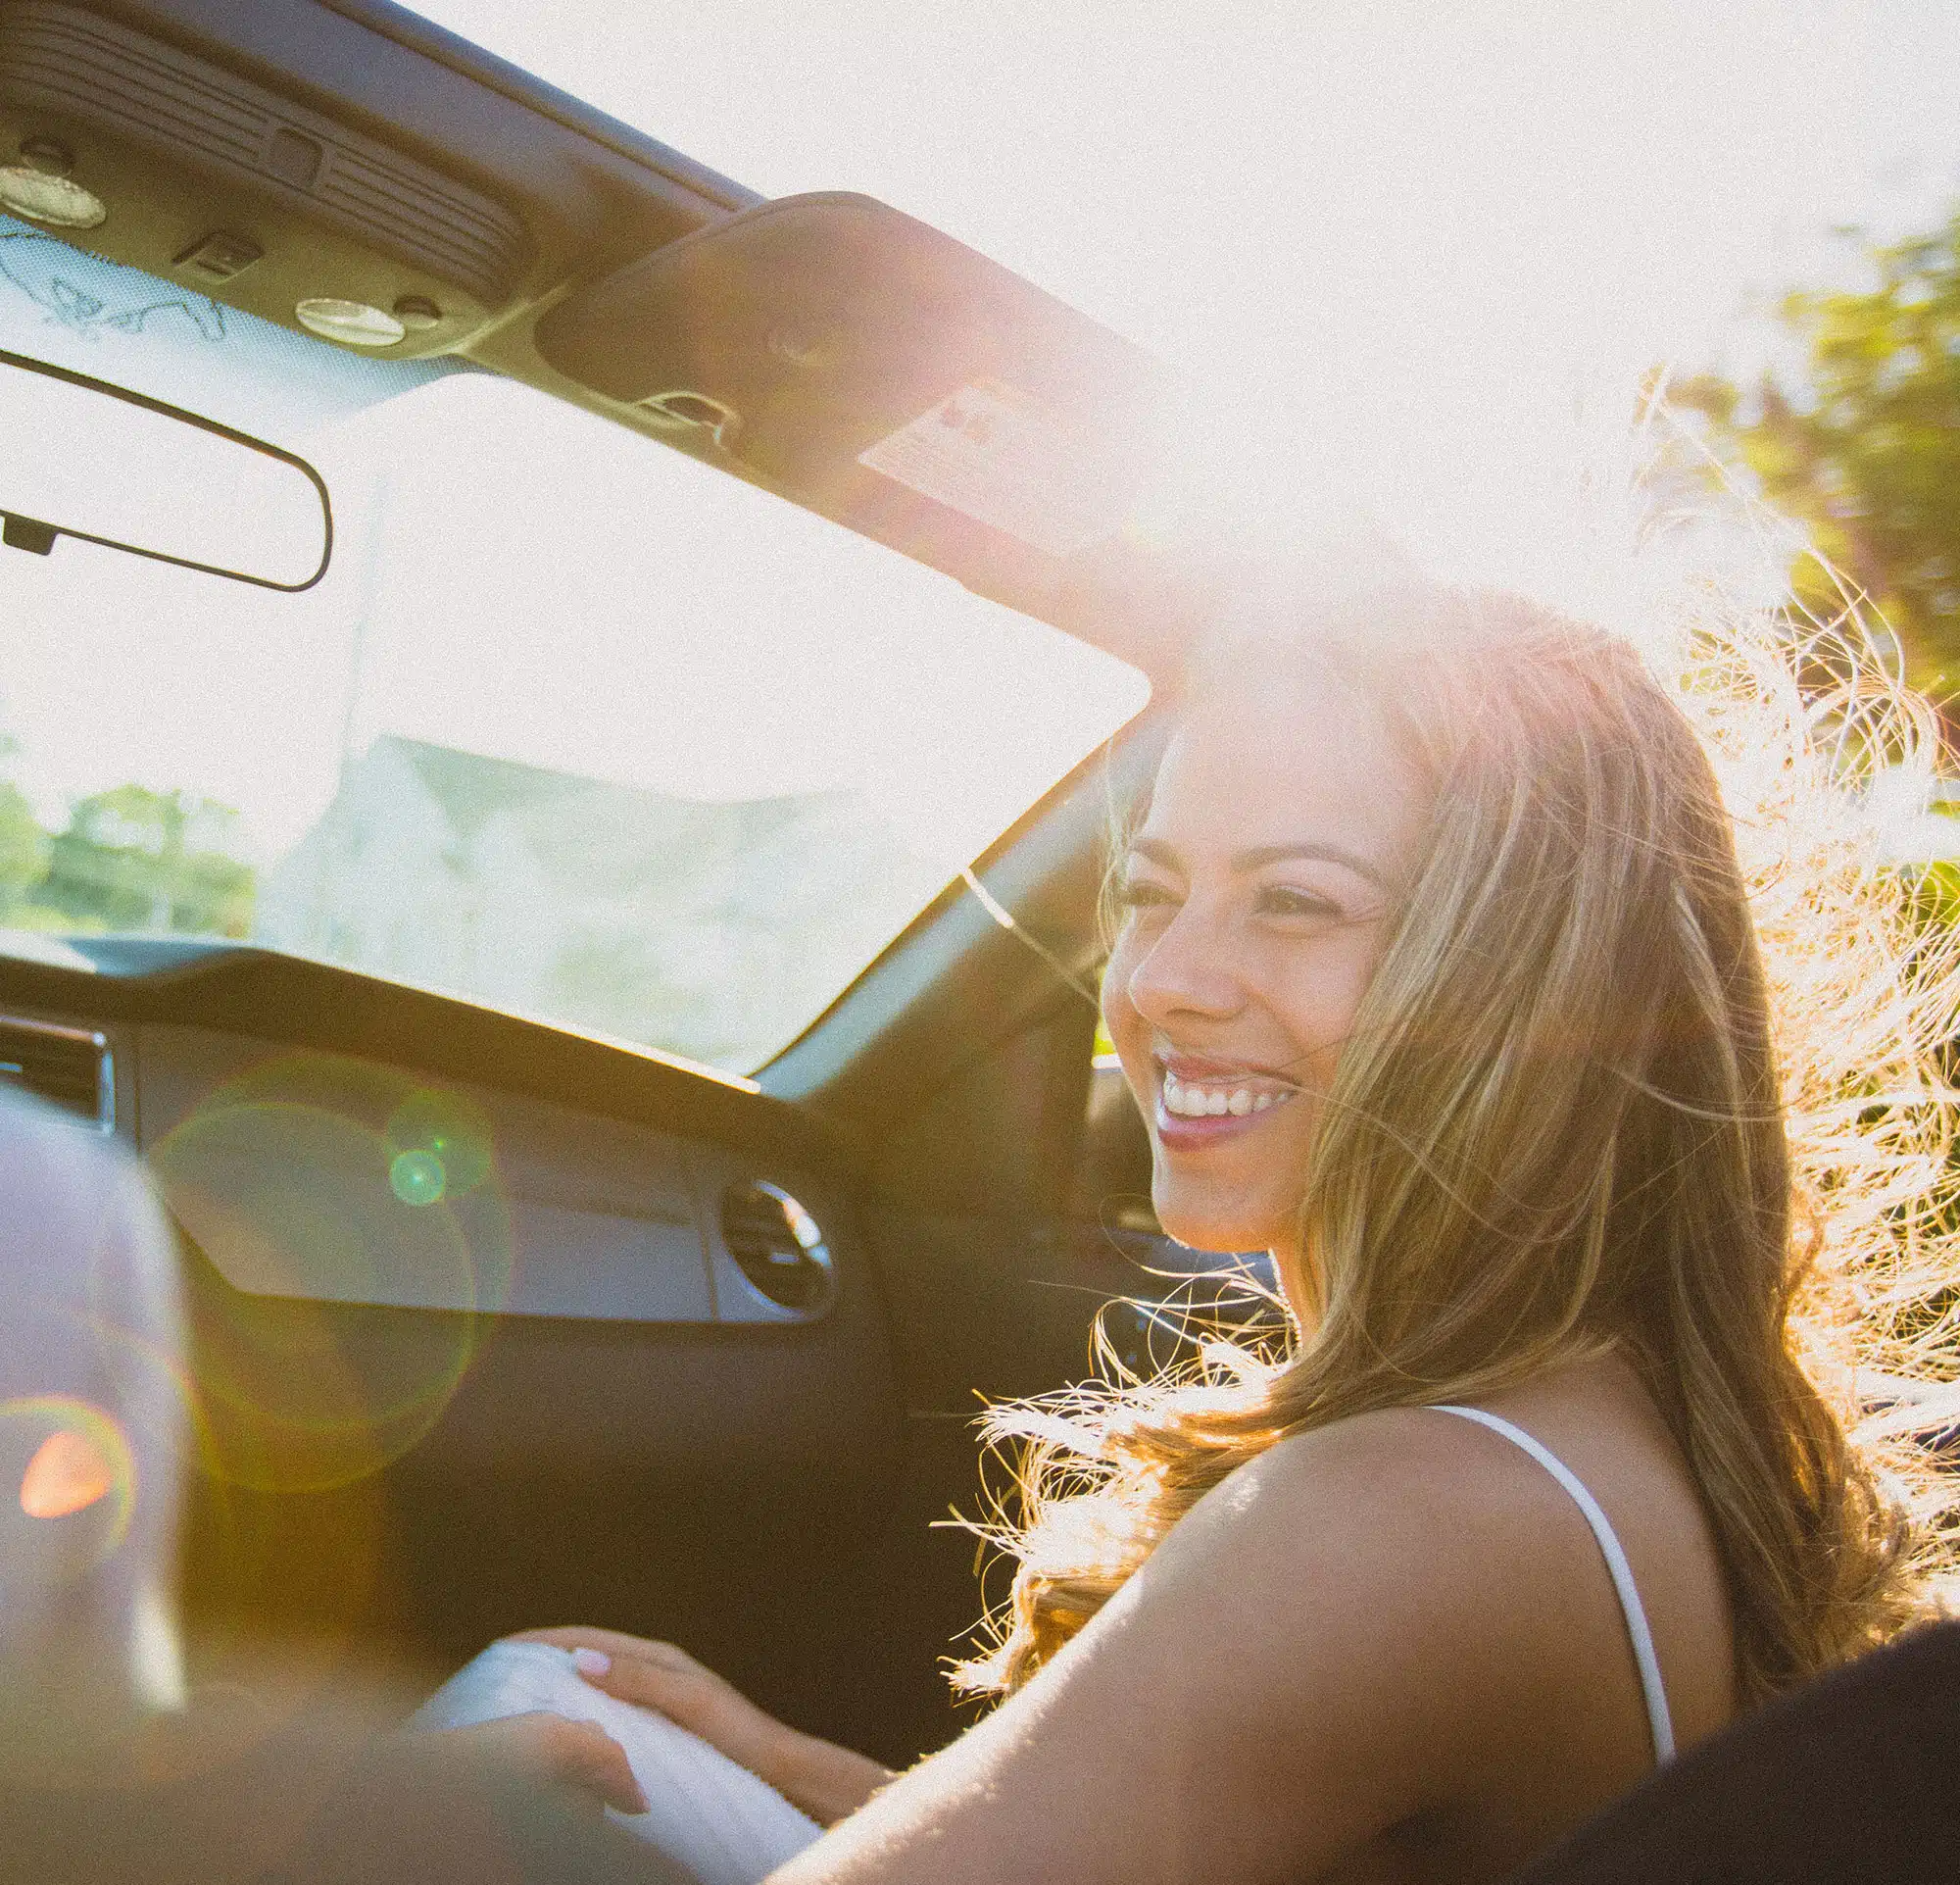 Smiling woman riding in passenger seat of a vehicle